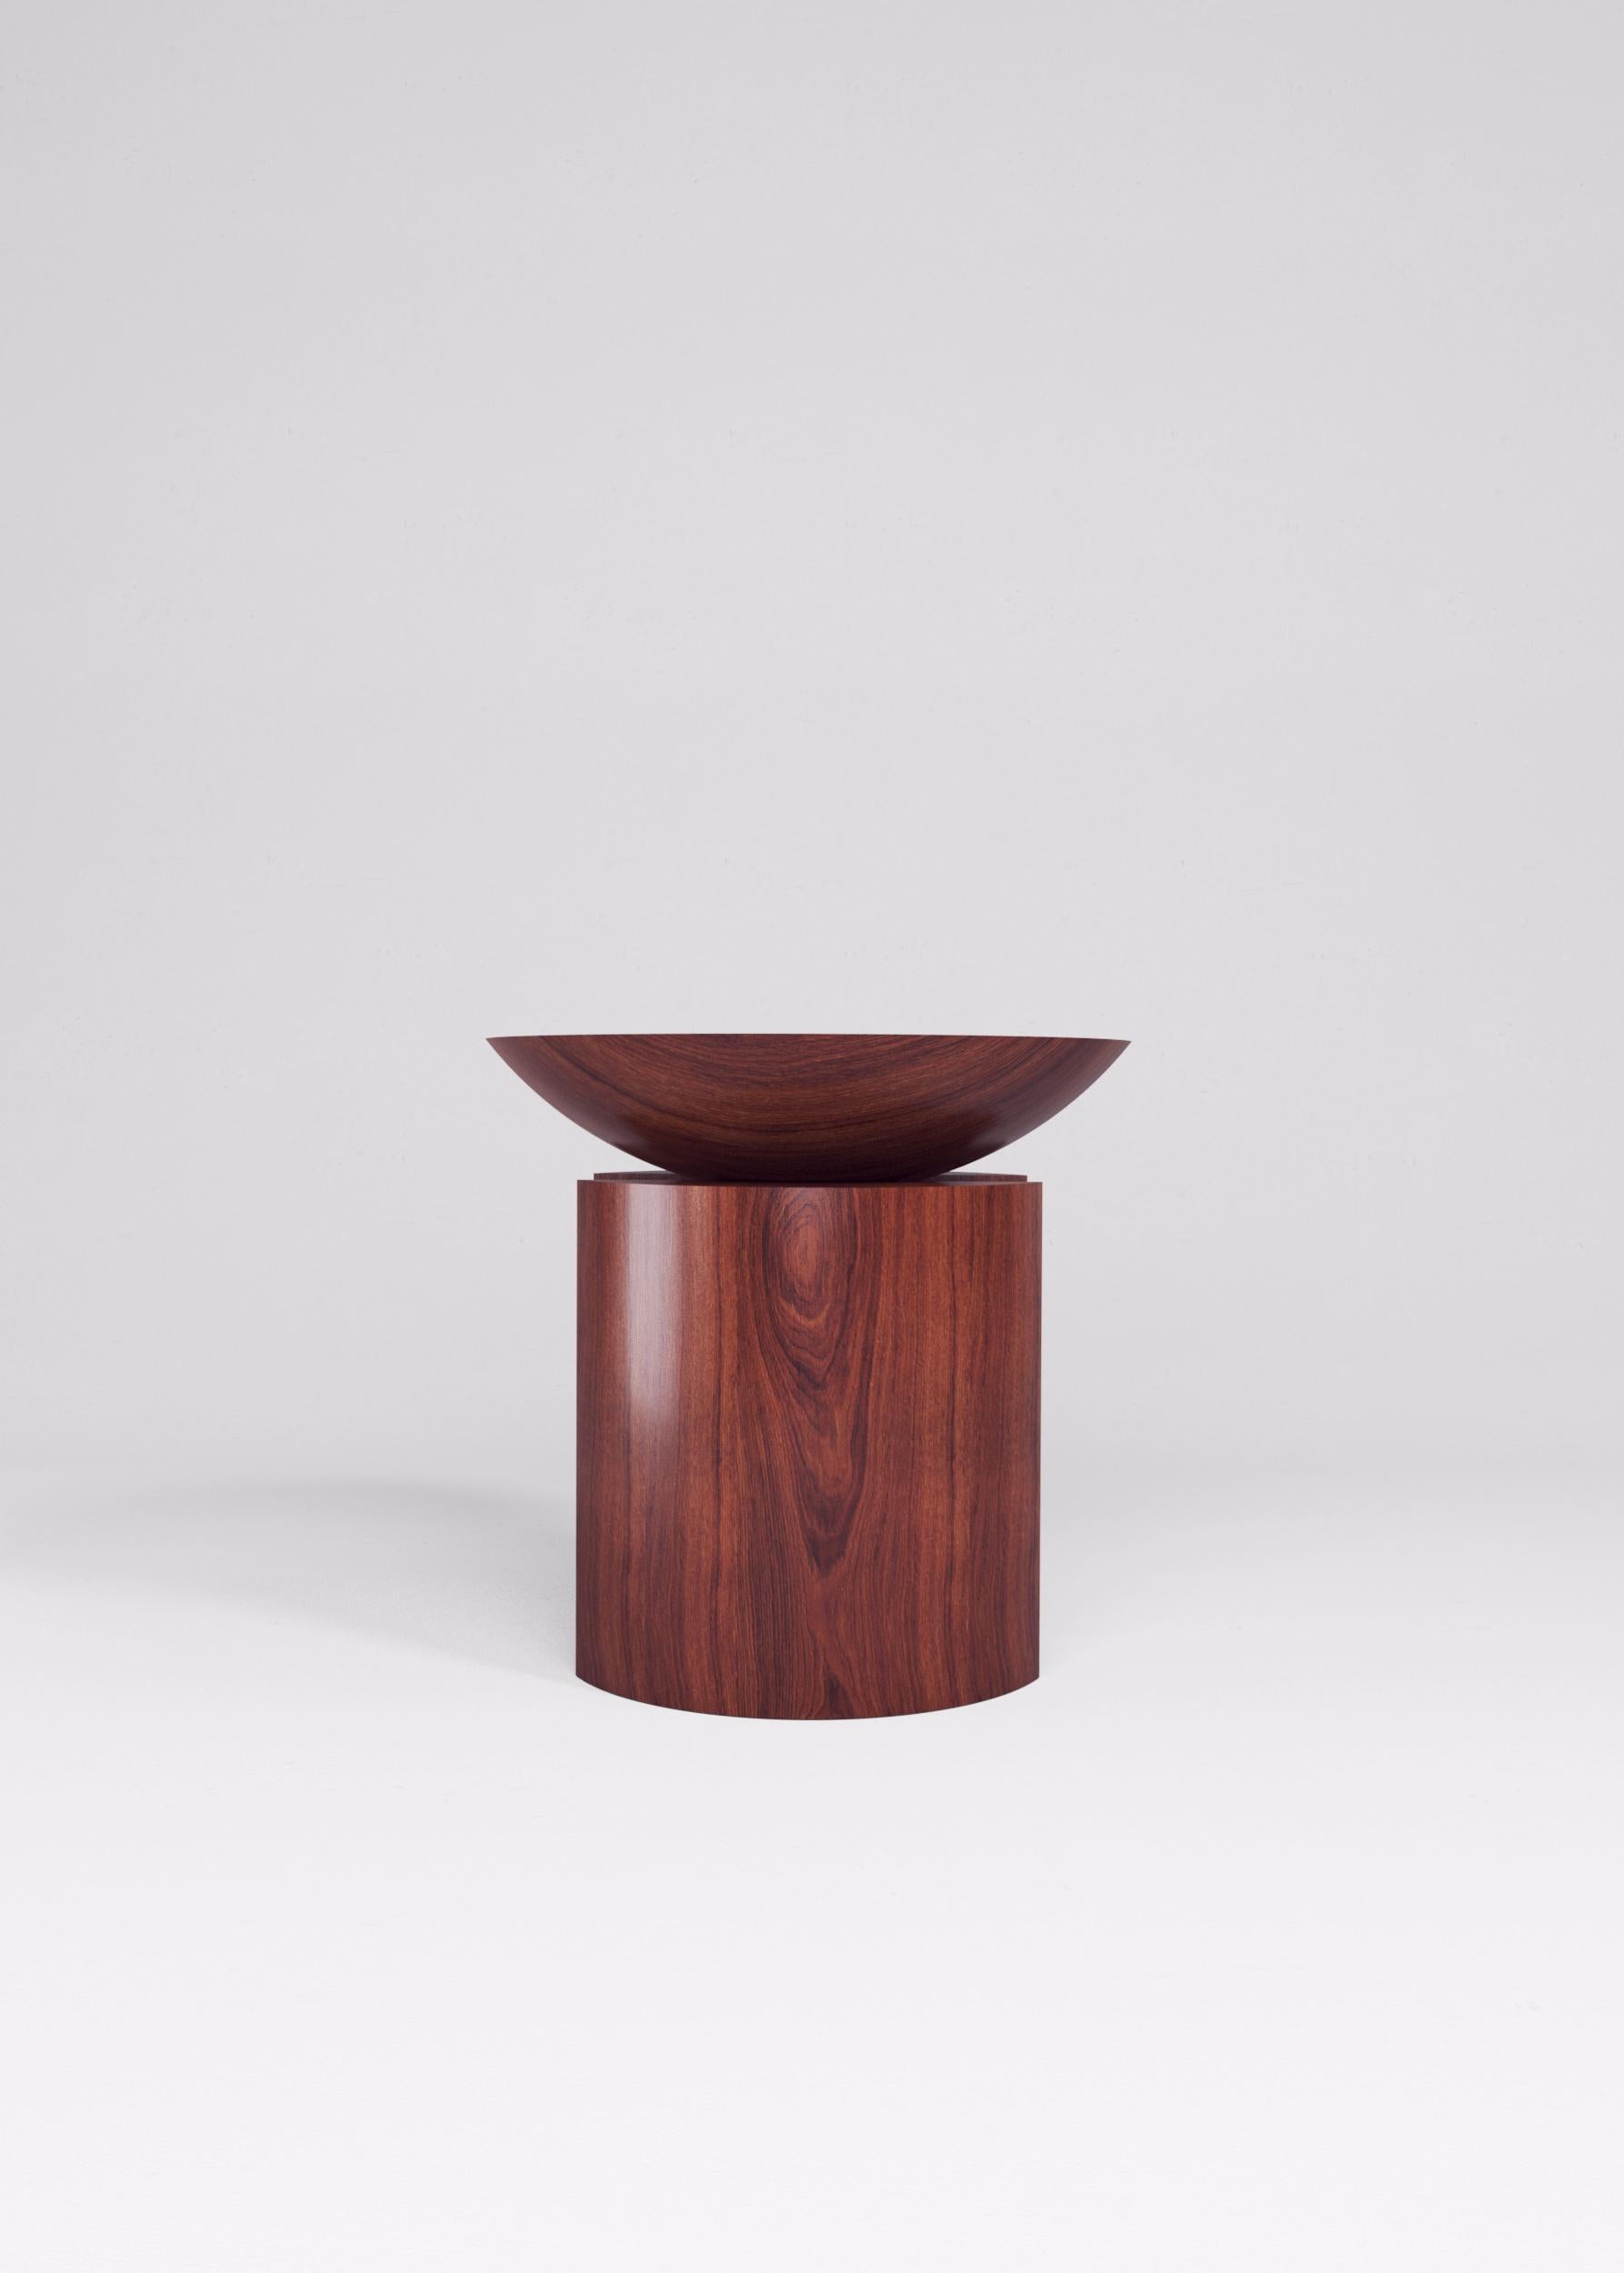 Minimalist Anca Larga in Oil / Sculptural Side Table/Stool / Hardwood by Pedro Paulo Venzon For Sale